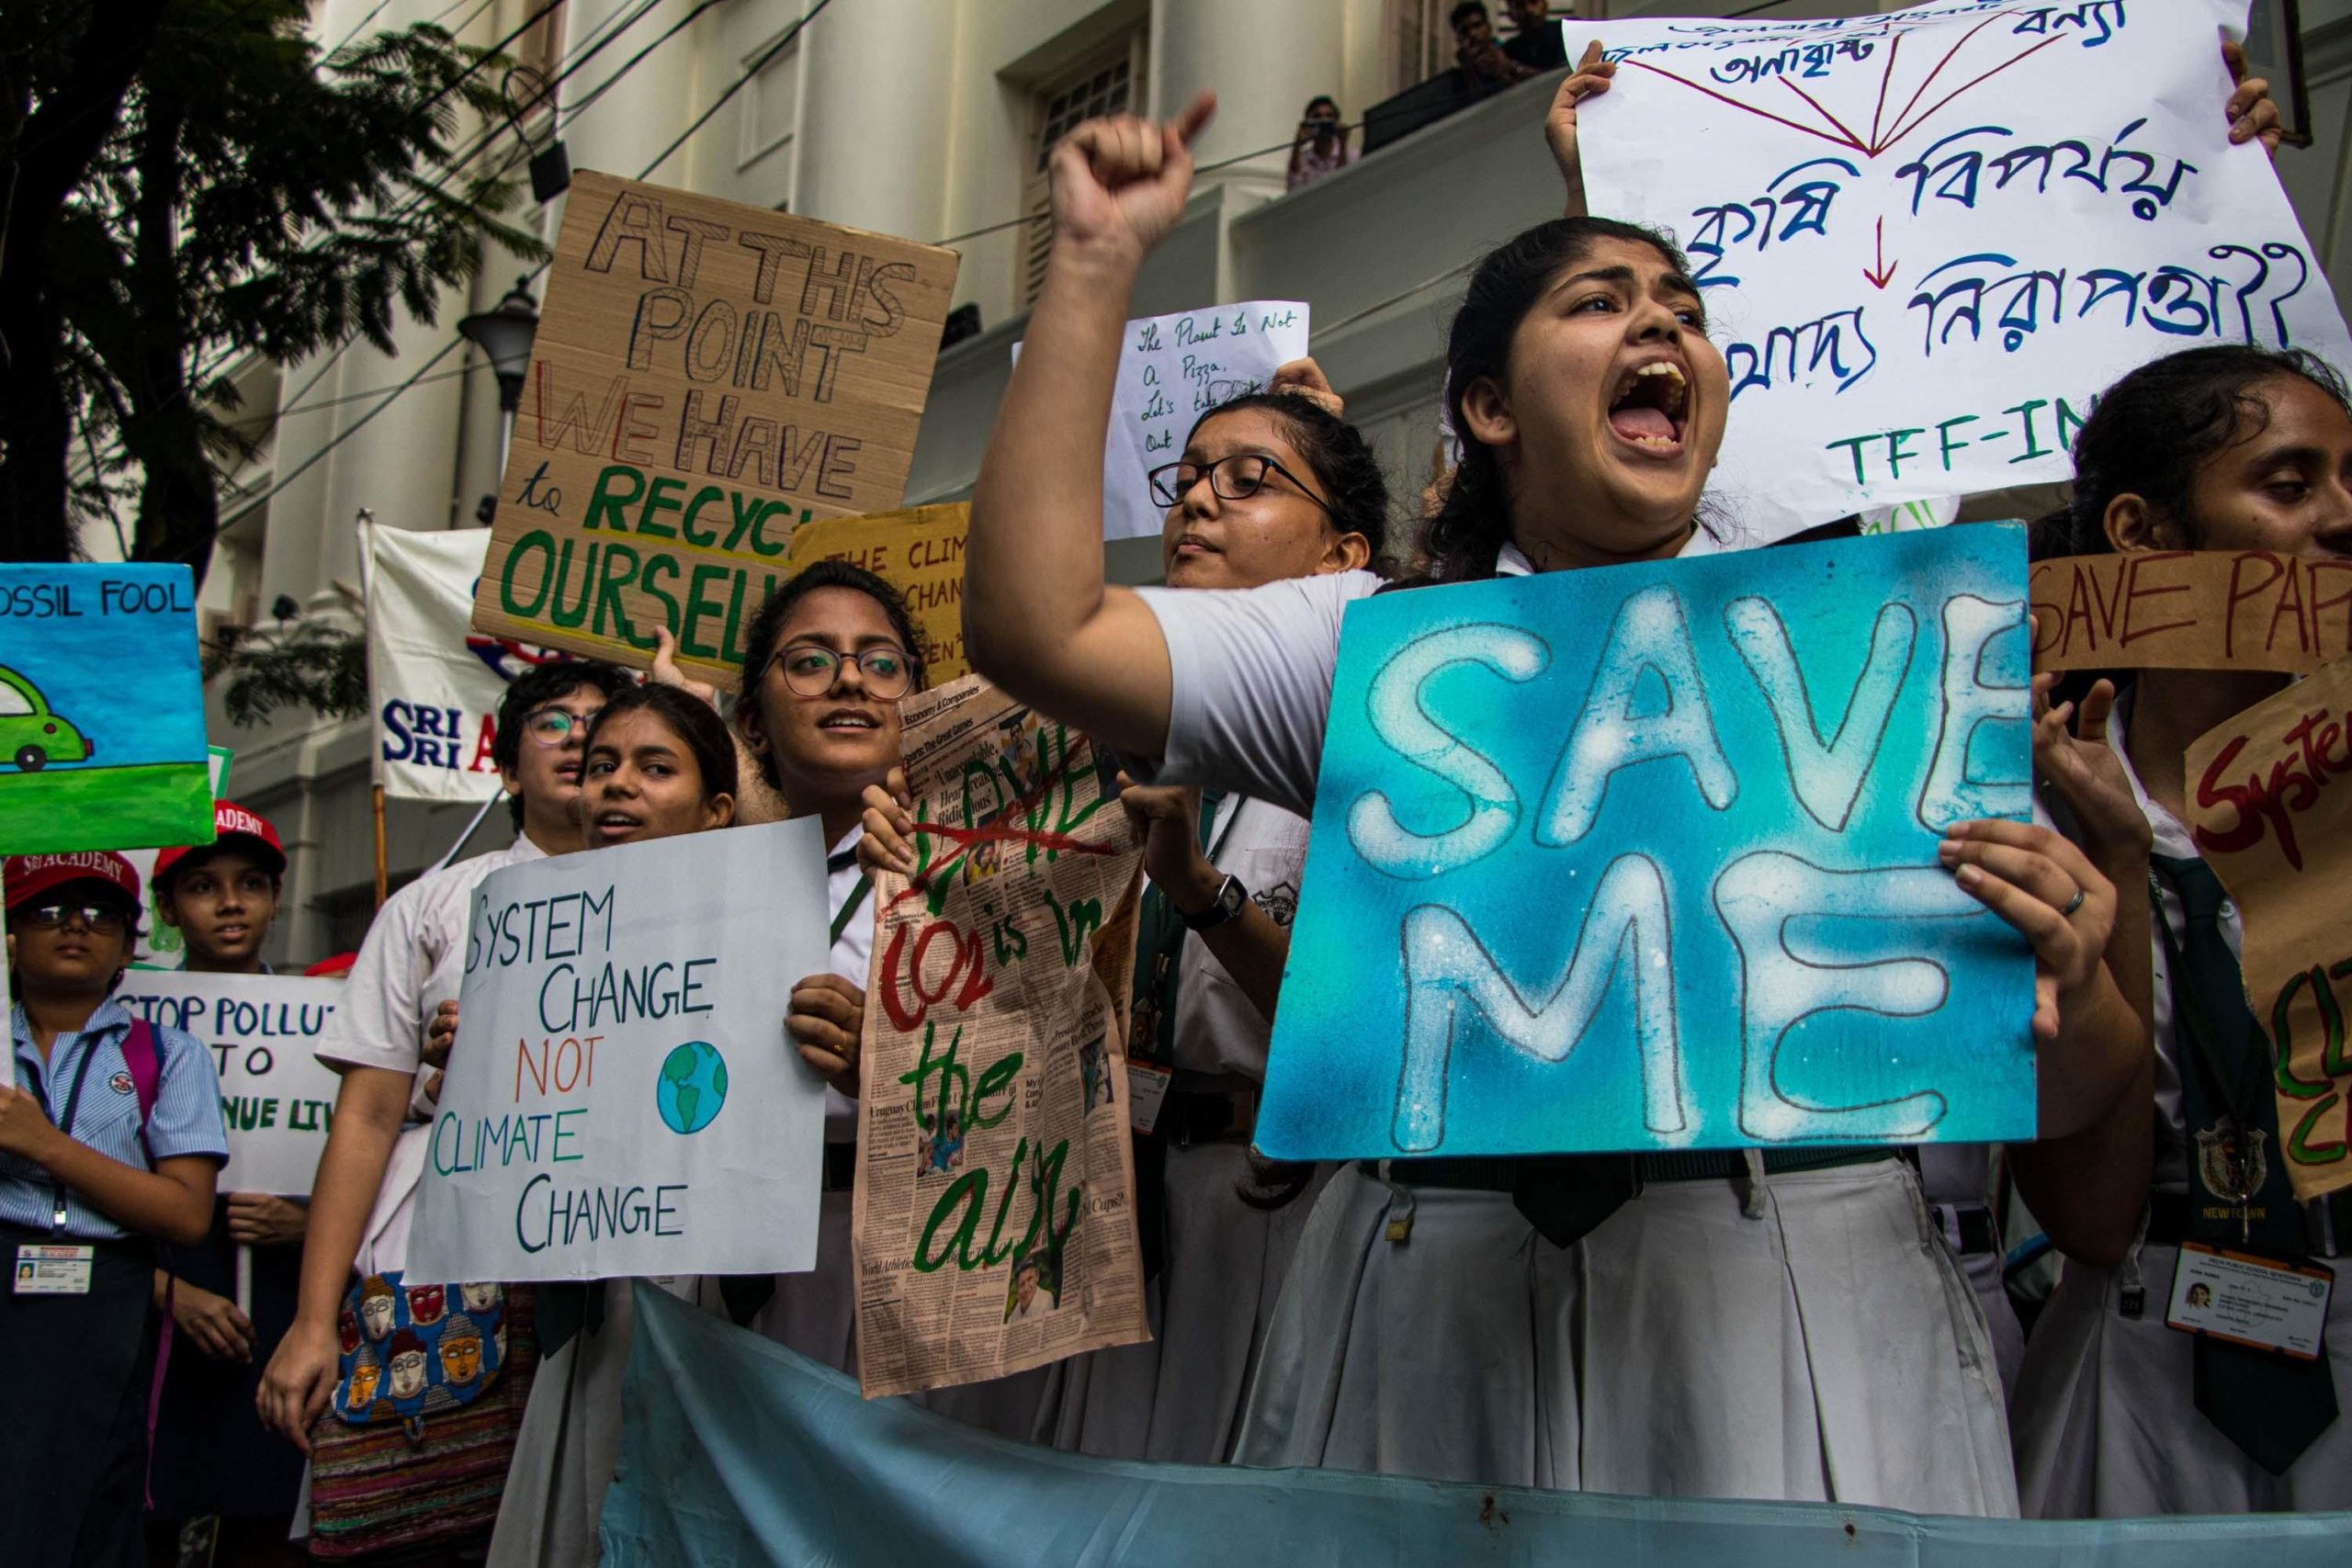 A Fridays for Future March for Climate Justice in Kolkata, India in September 2019.